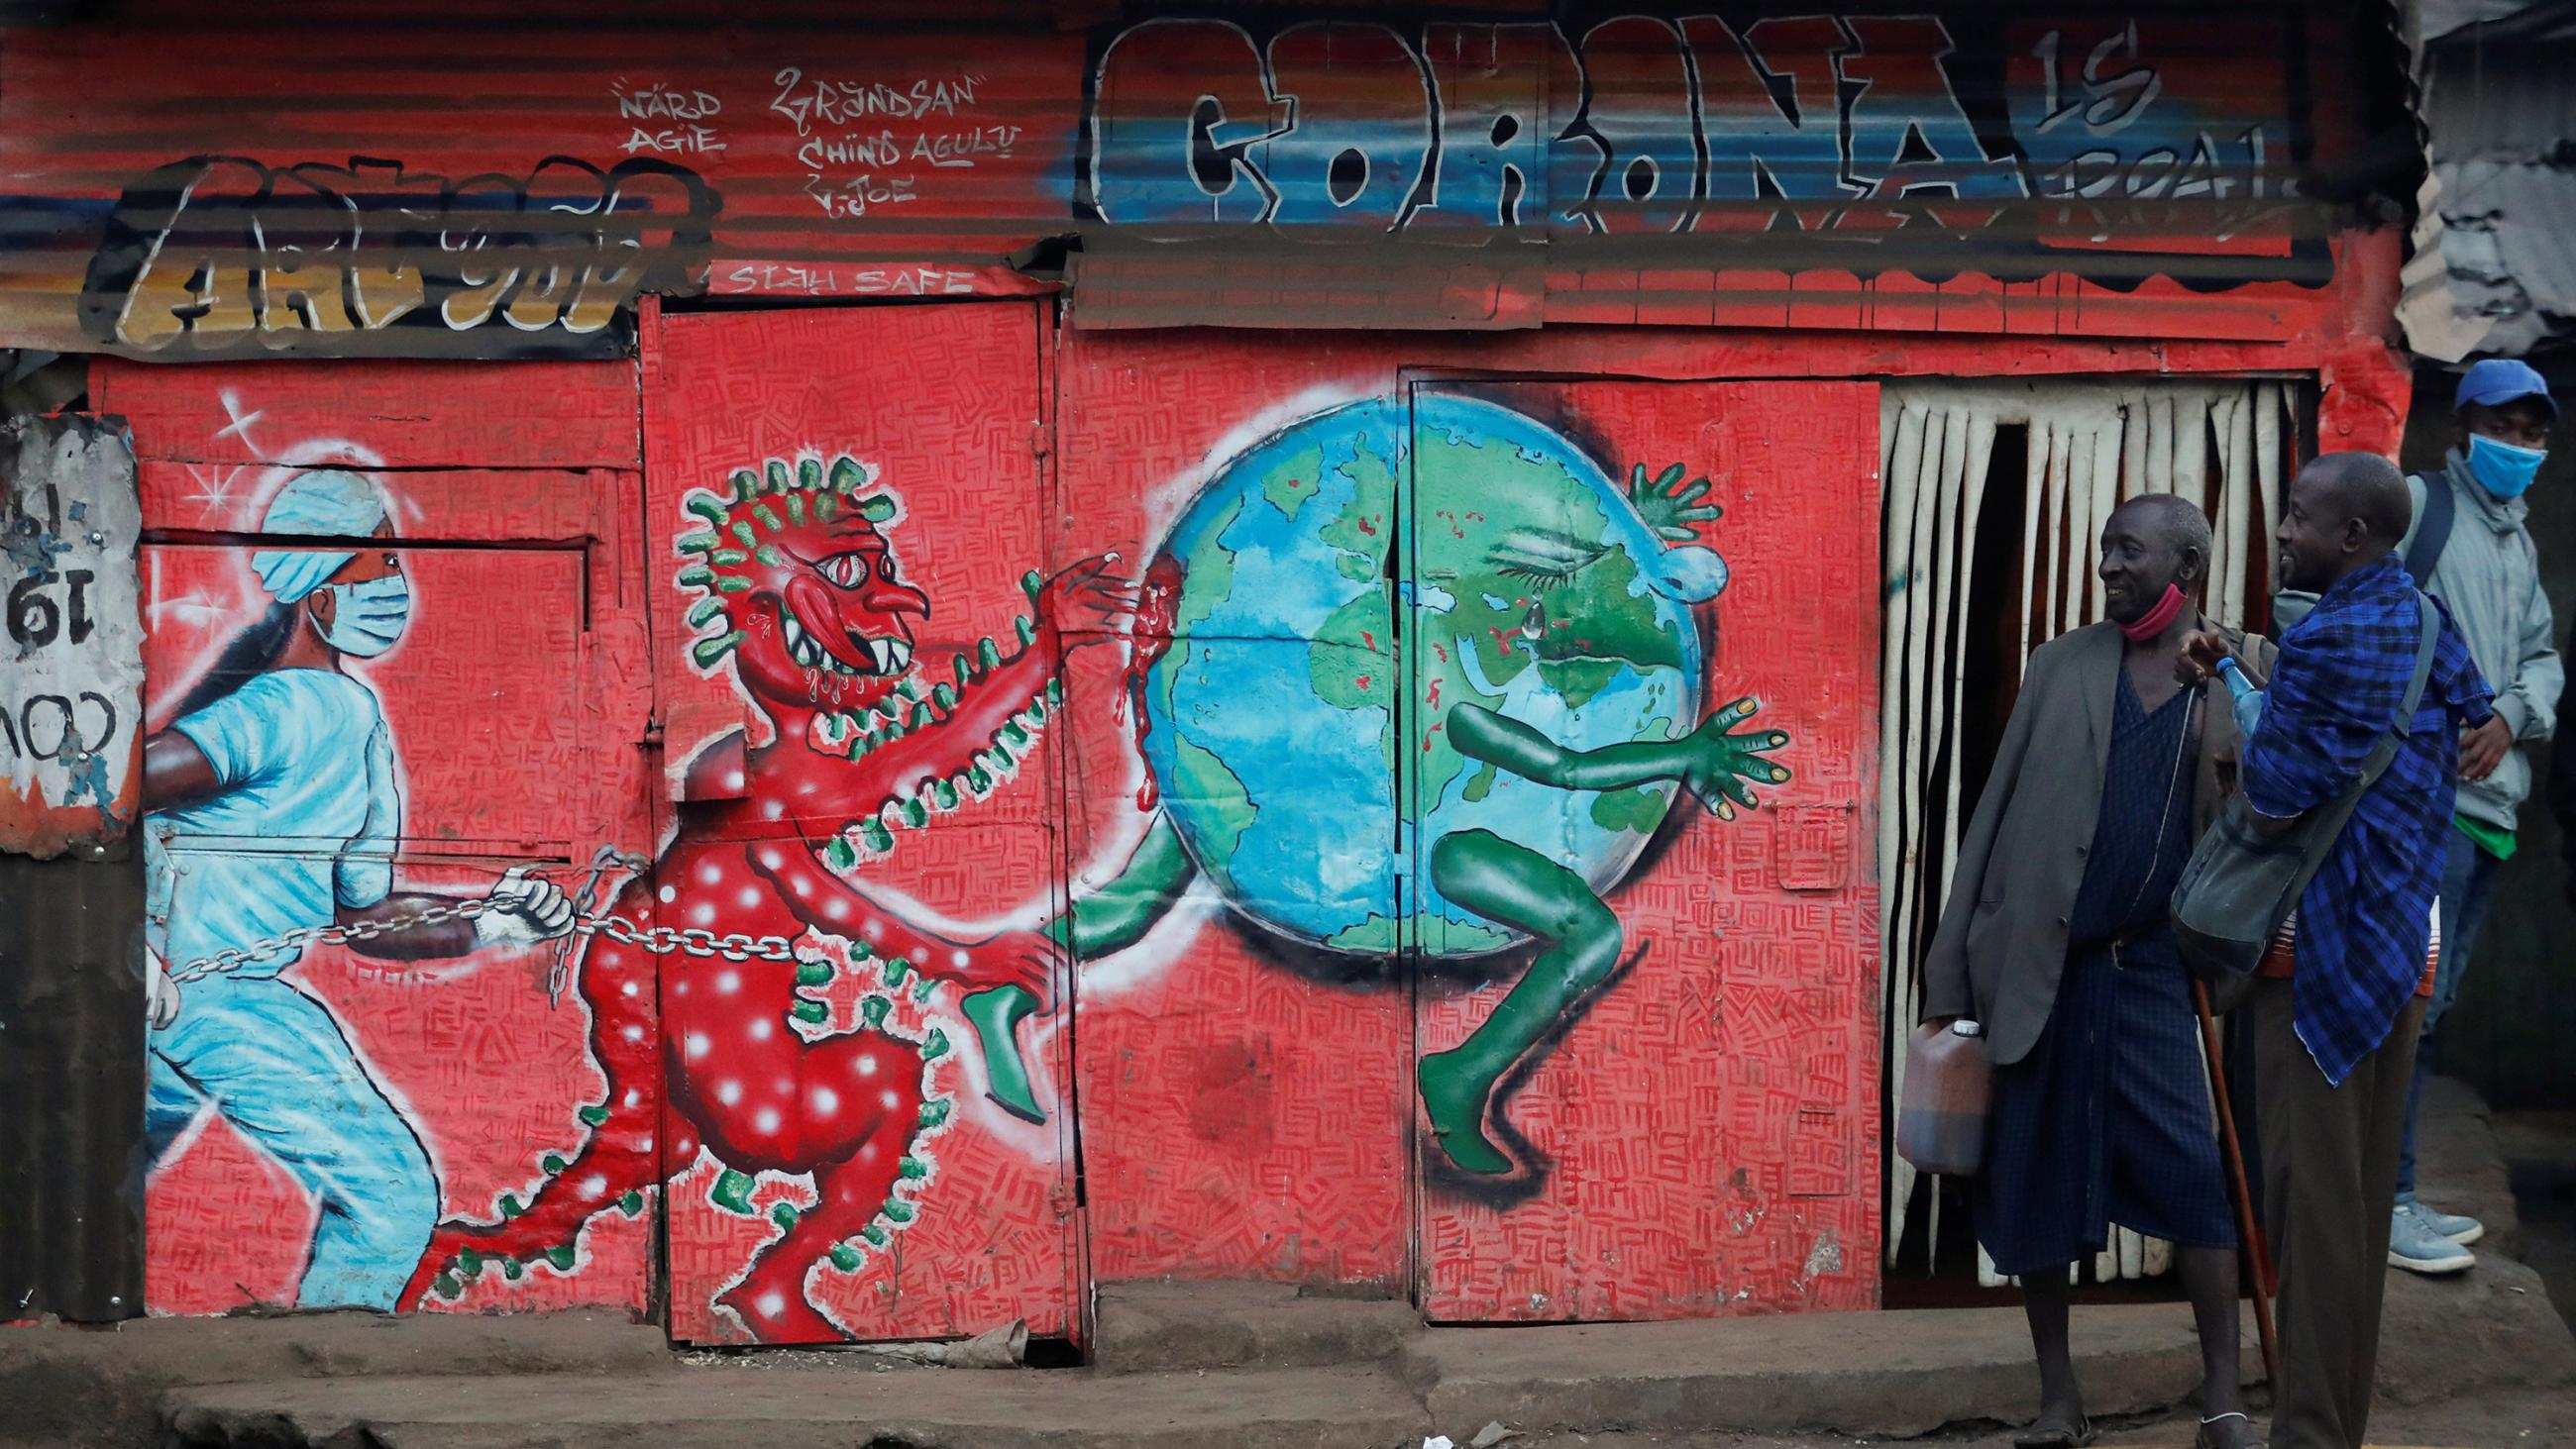 The photo shows a few people milling ablut the entrance of a building on the side of which is painted a mural with a red figure representing the personification of coronavirus chasing a globe while a nurse follows behind in hot pursuit. 